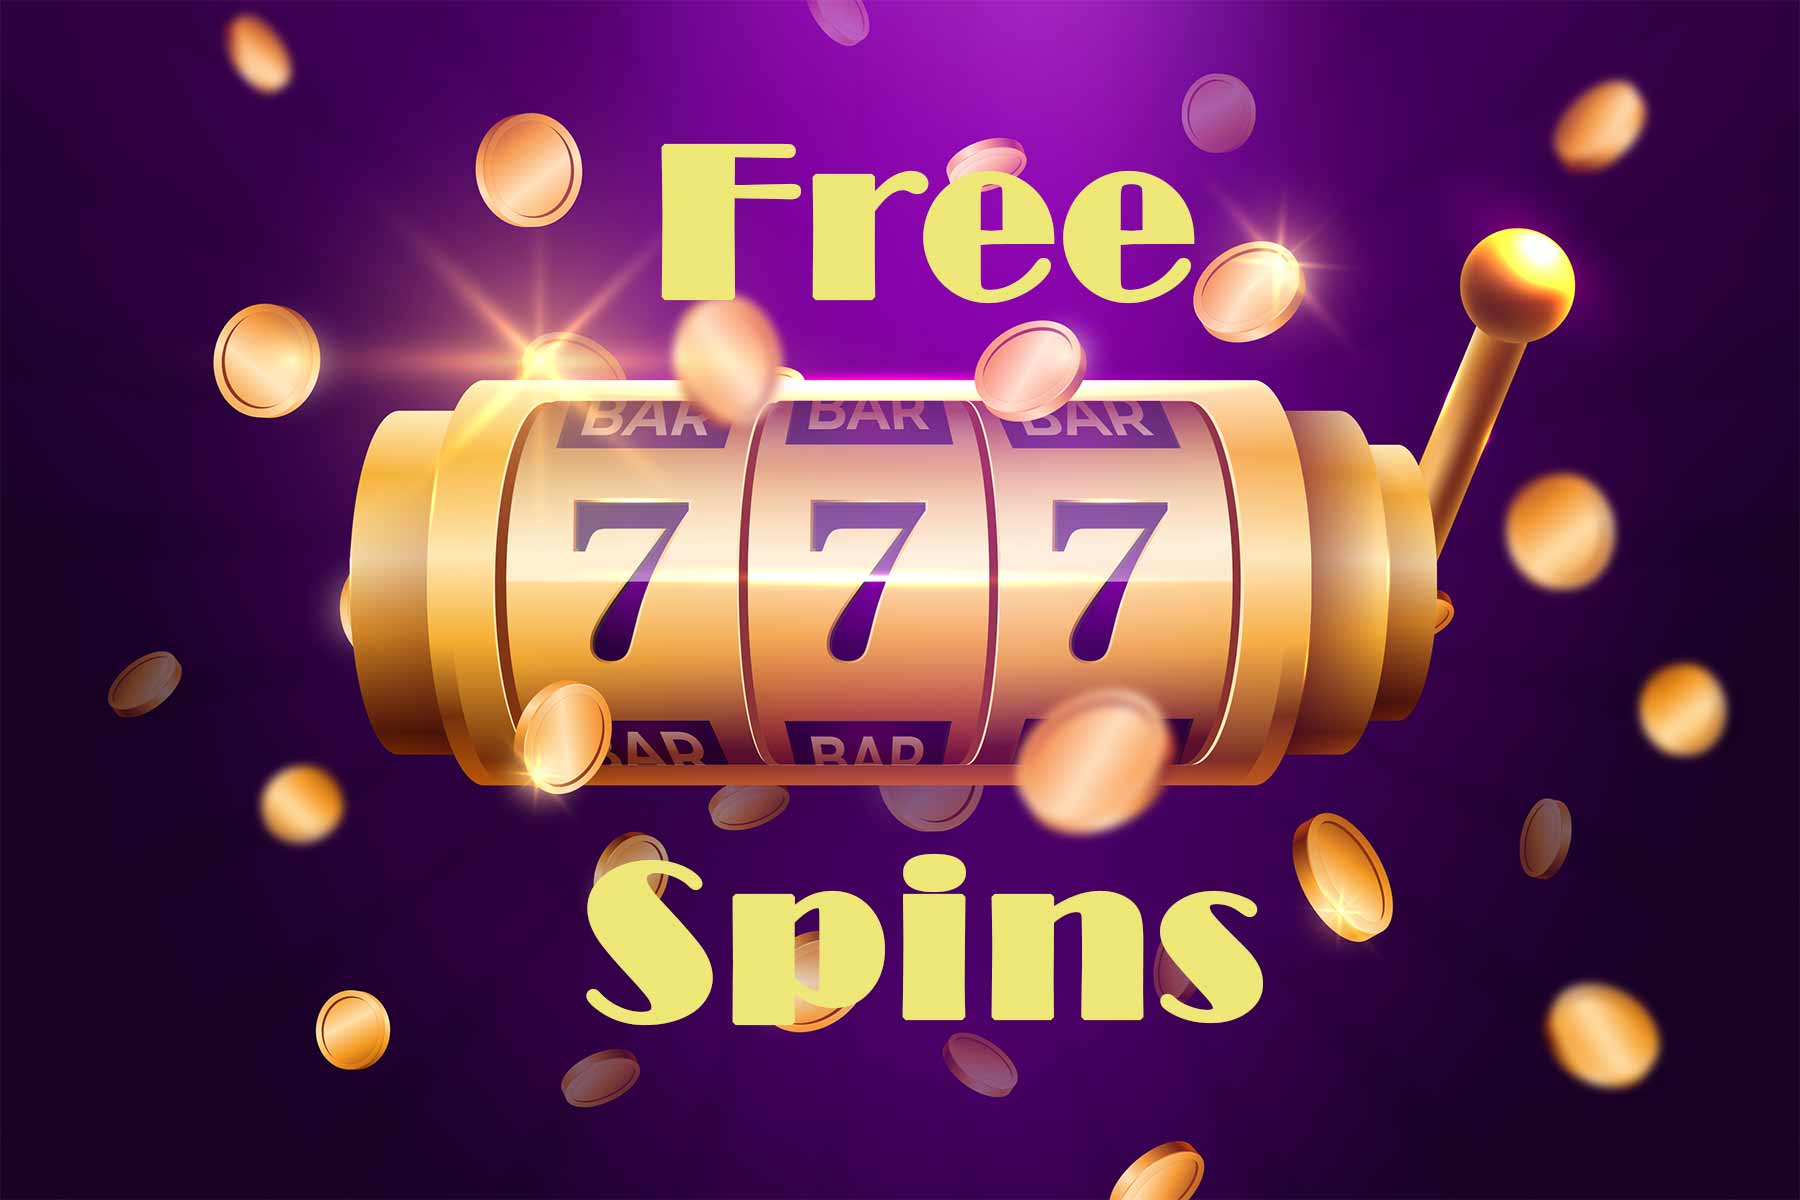 Are free spins the most lucrative casino bonus?